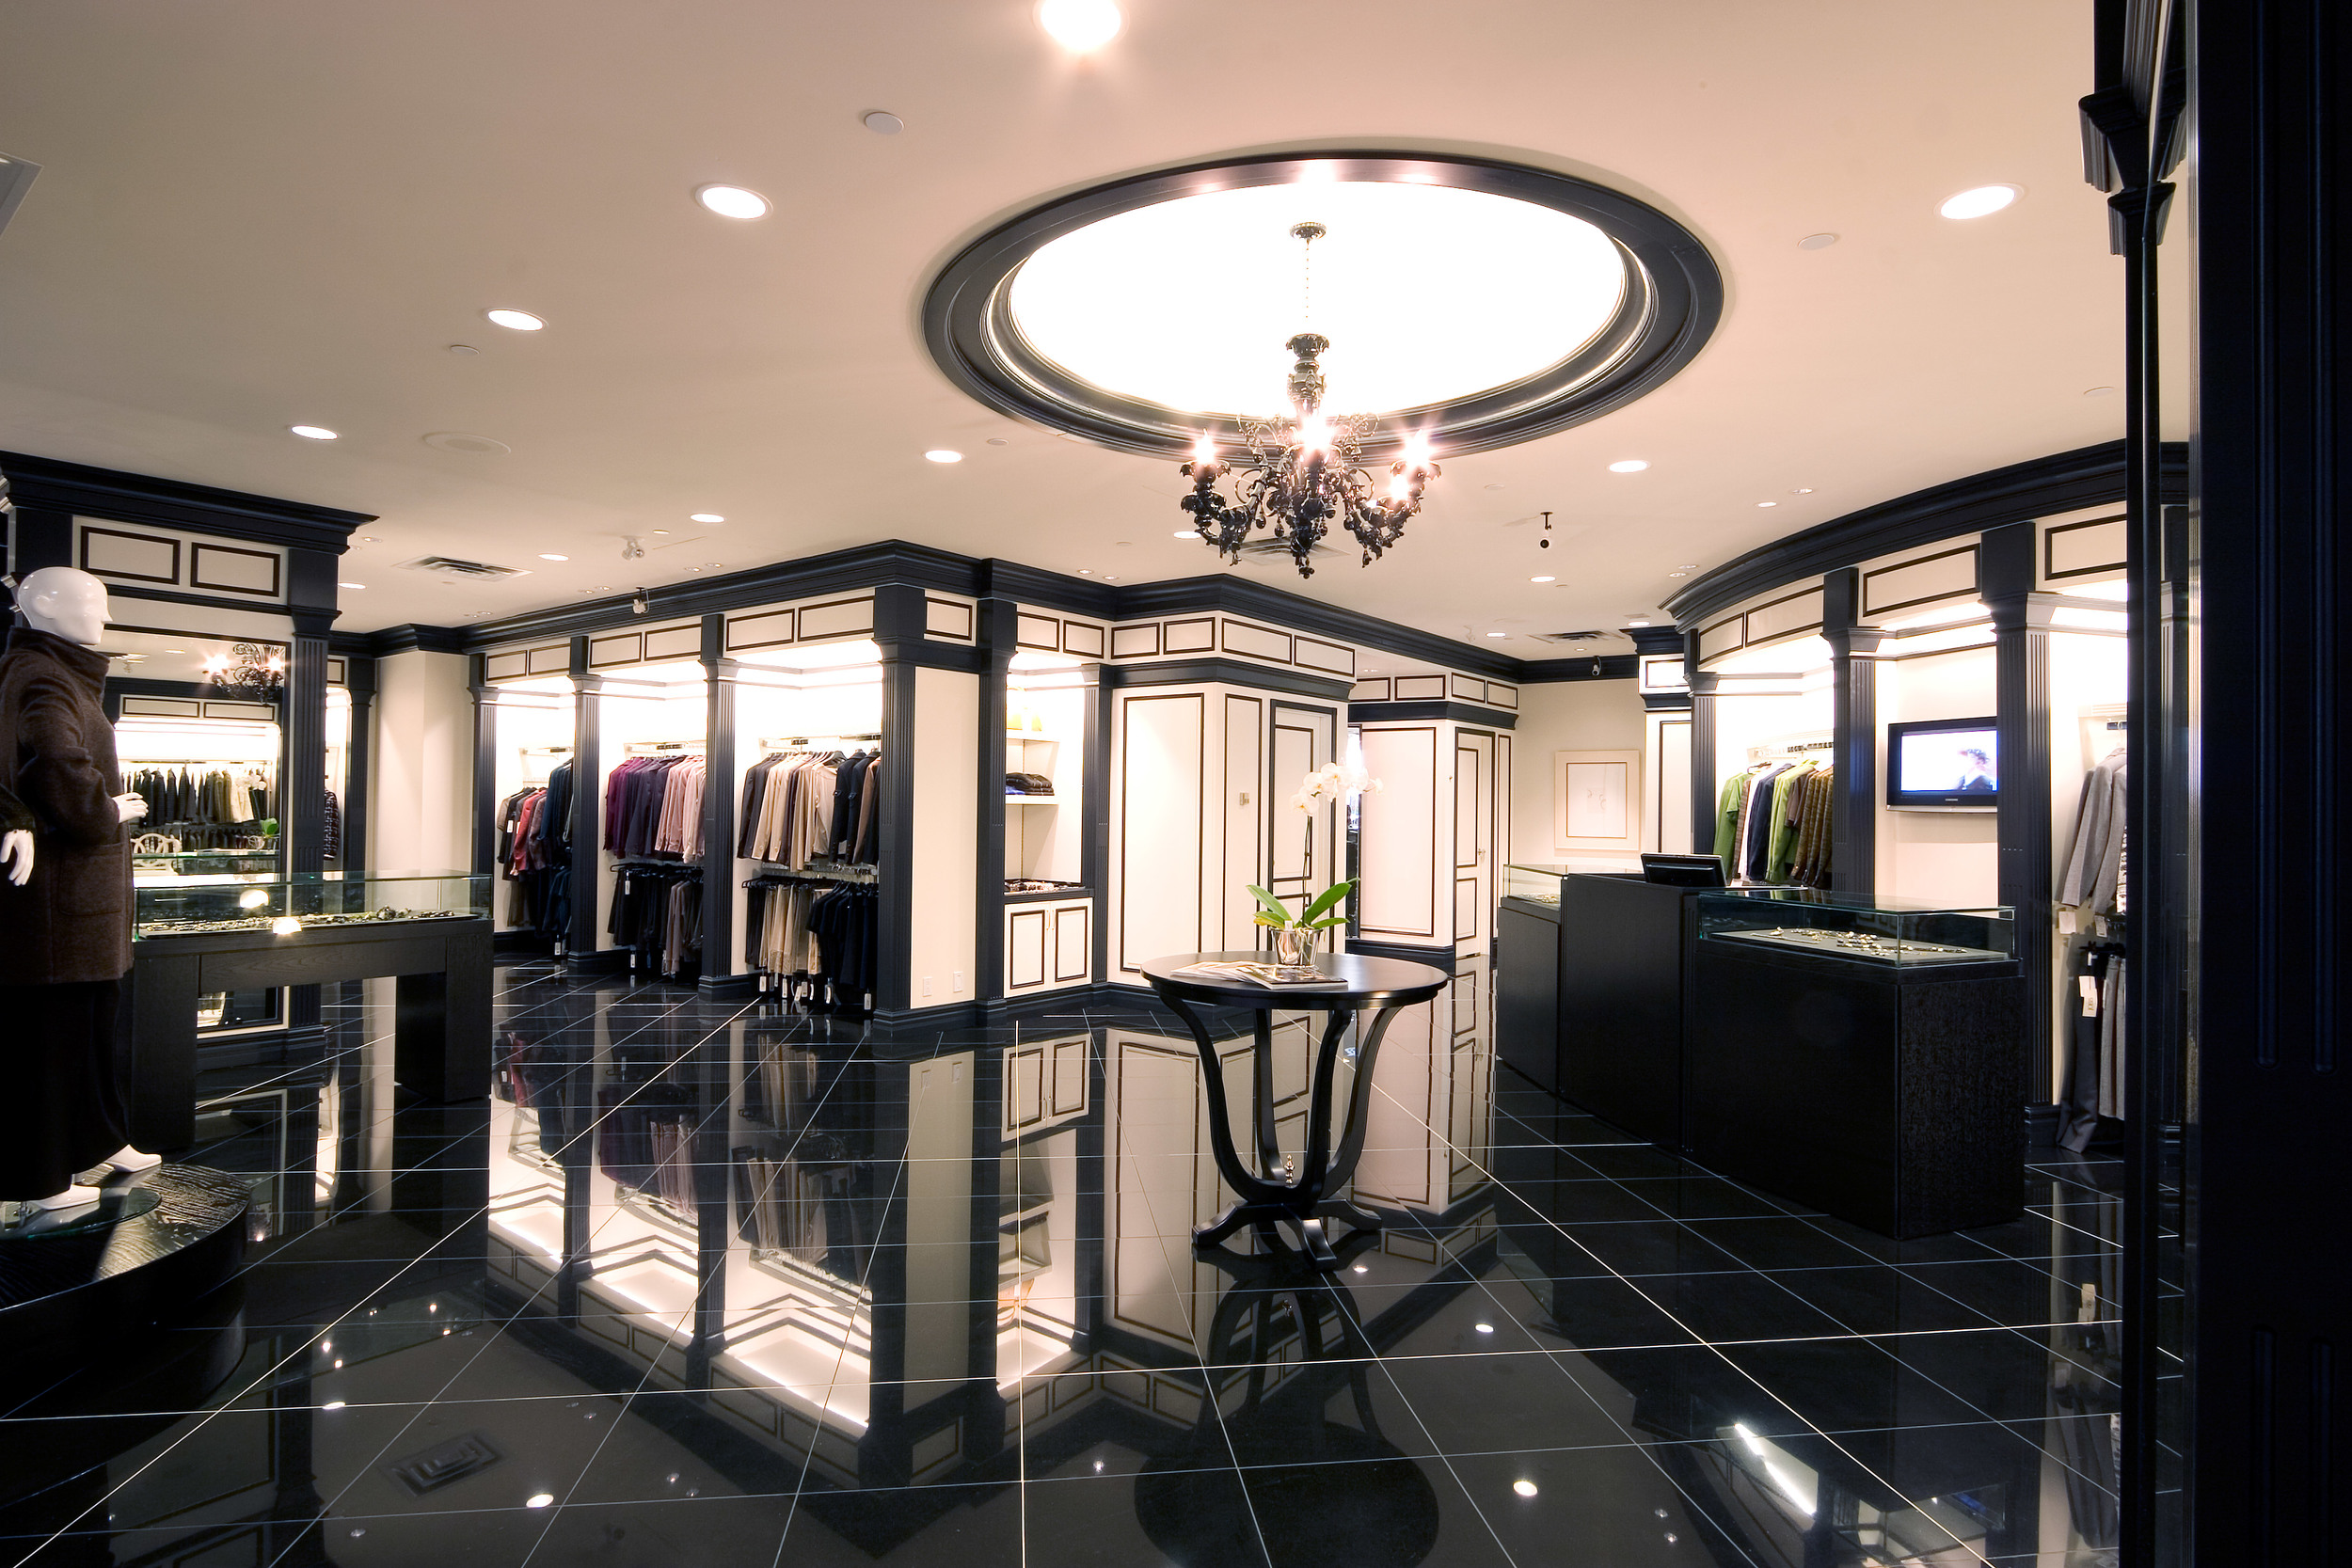   La Chic&nbsp; Bankers Hall, Calgary&nbsp;  A high-end boutique retail interior with a high-contrast color and lighting scheme designed to specifically enhance the look of the products for sale. Traditional detailing combined with modern finishes. 